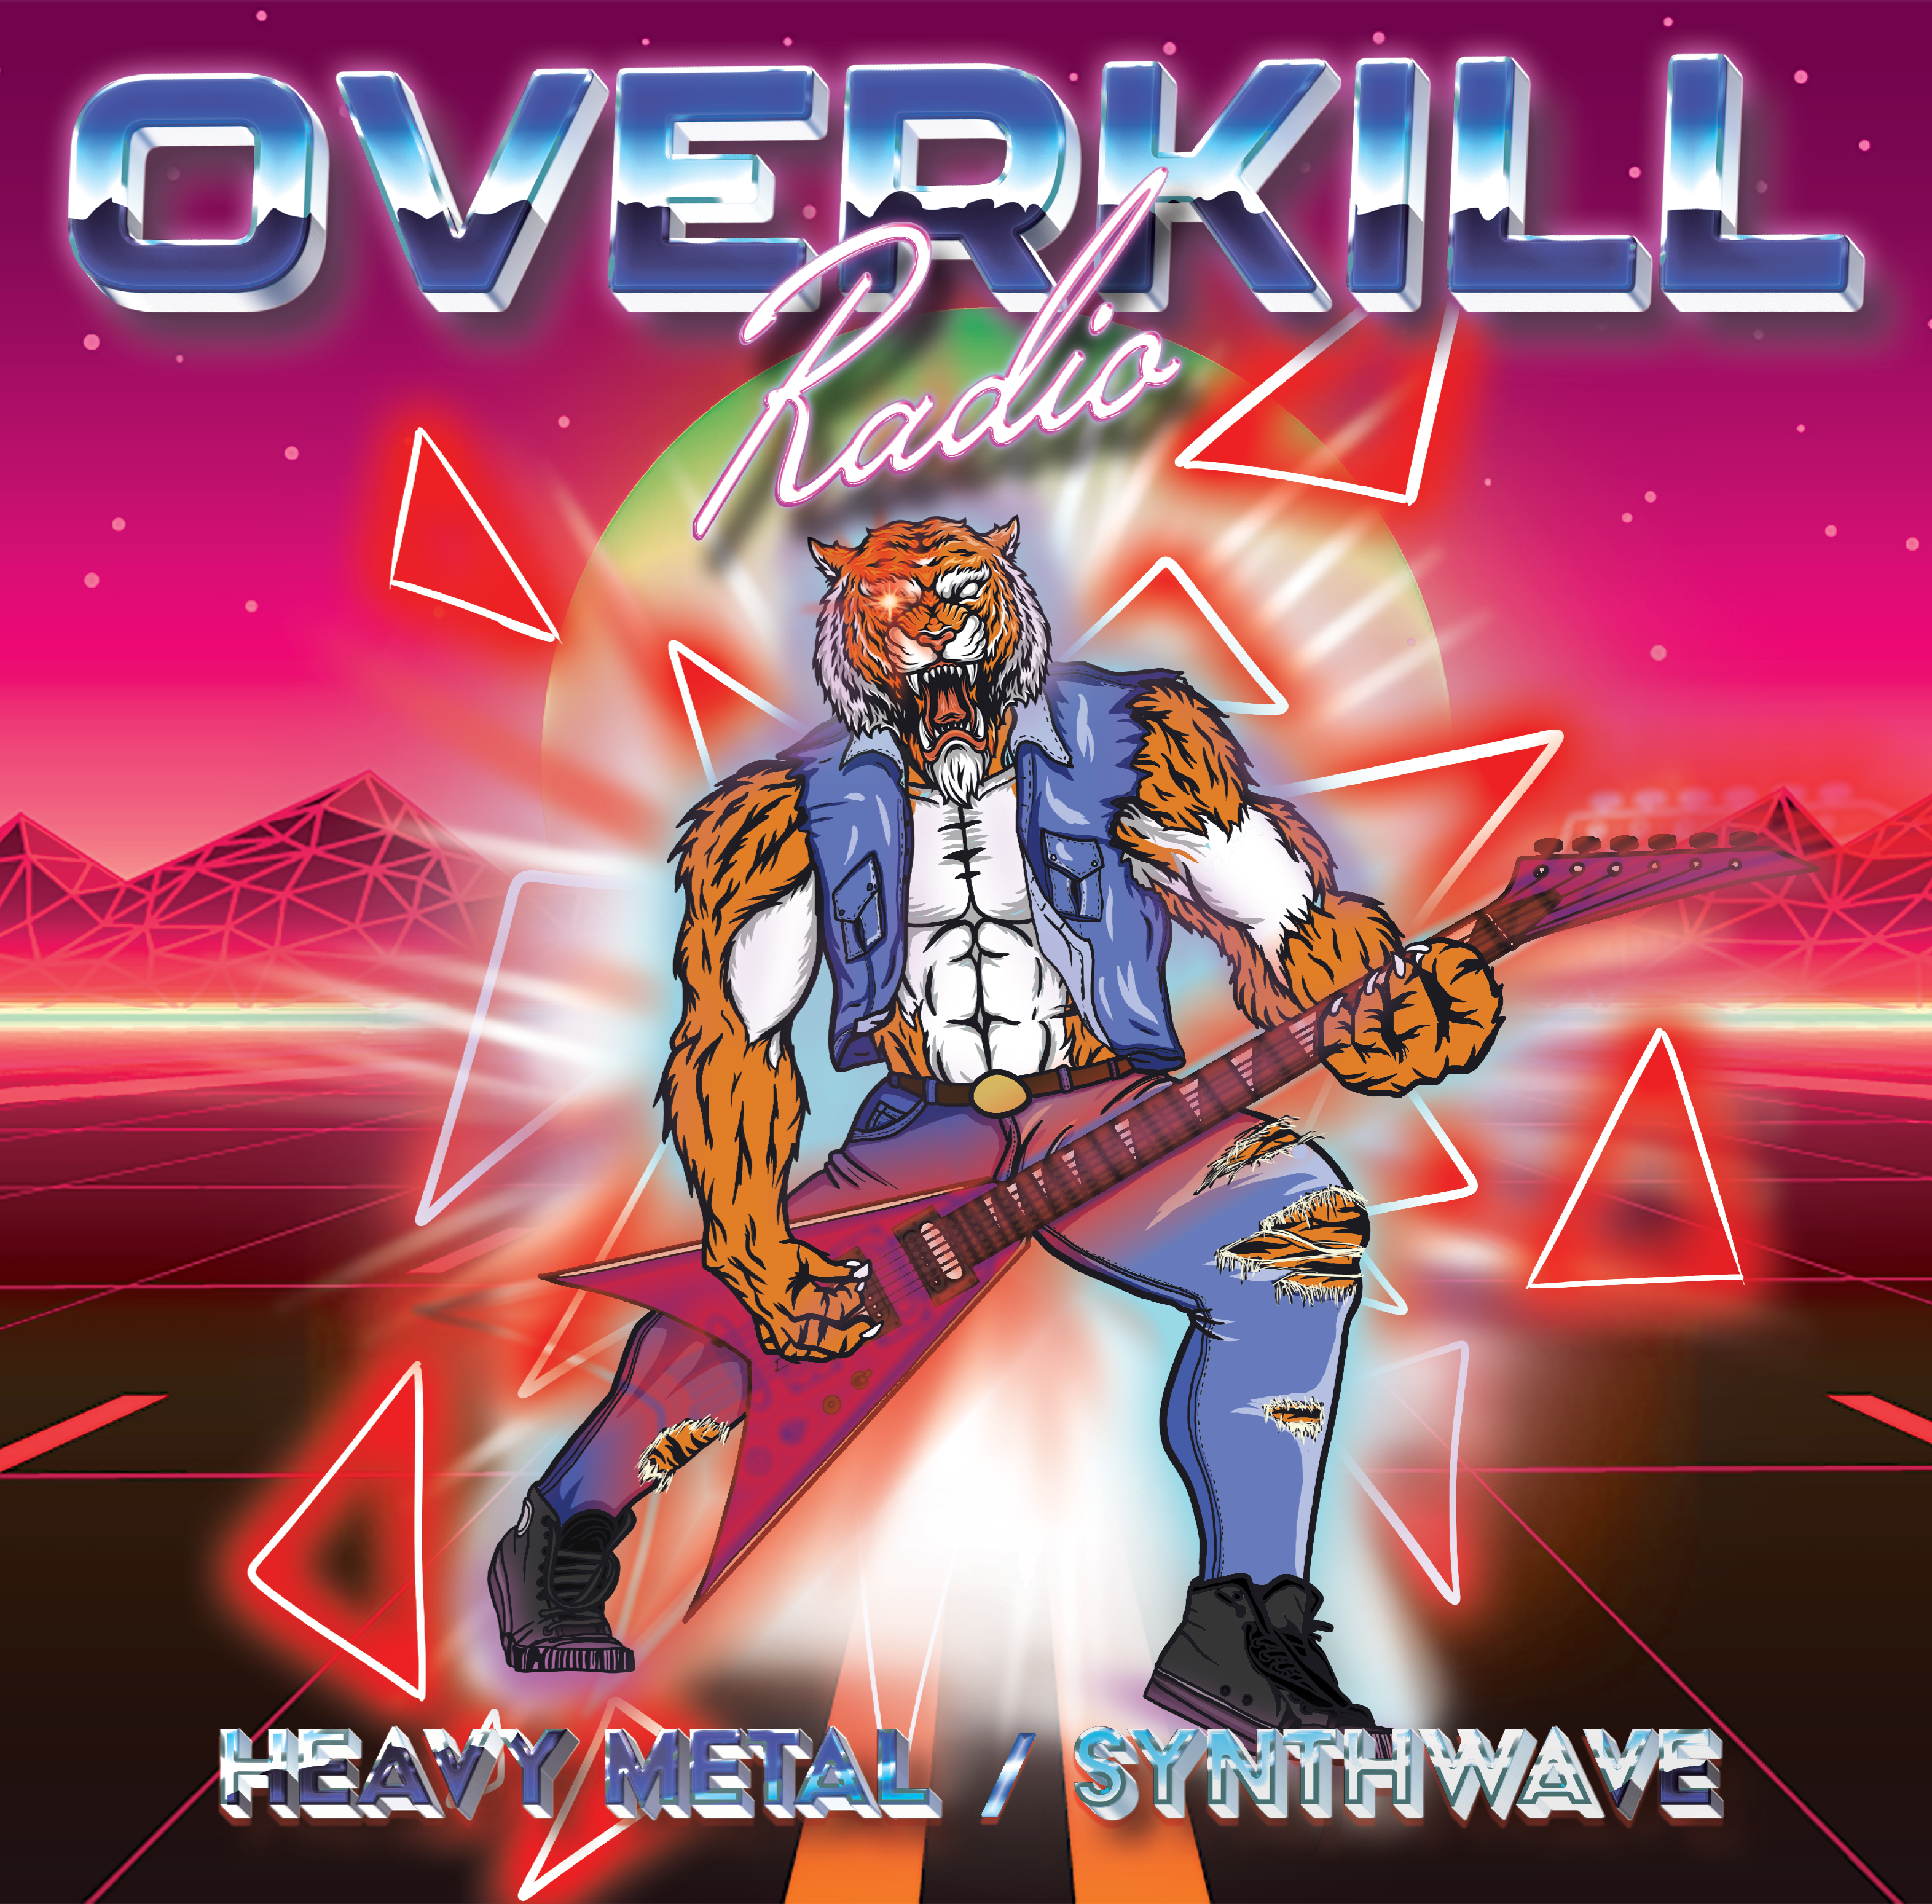 Art for DJ Auto Synthwave Bumper by OVERKILL RADIO